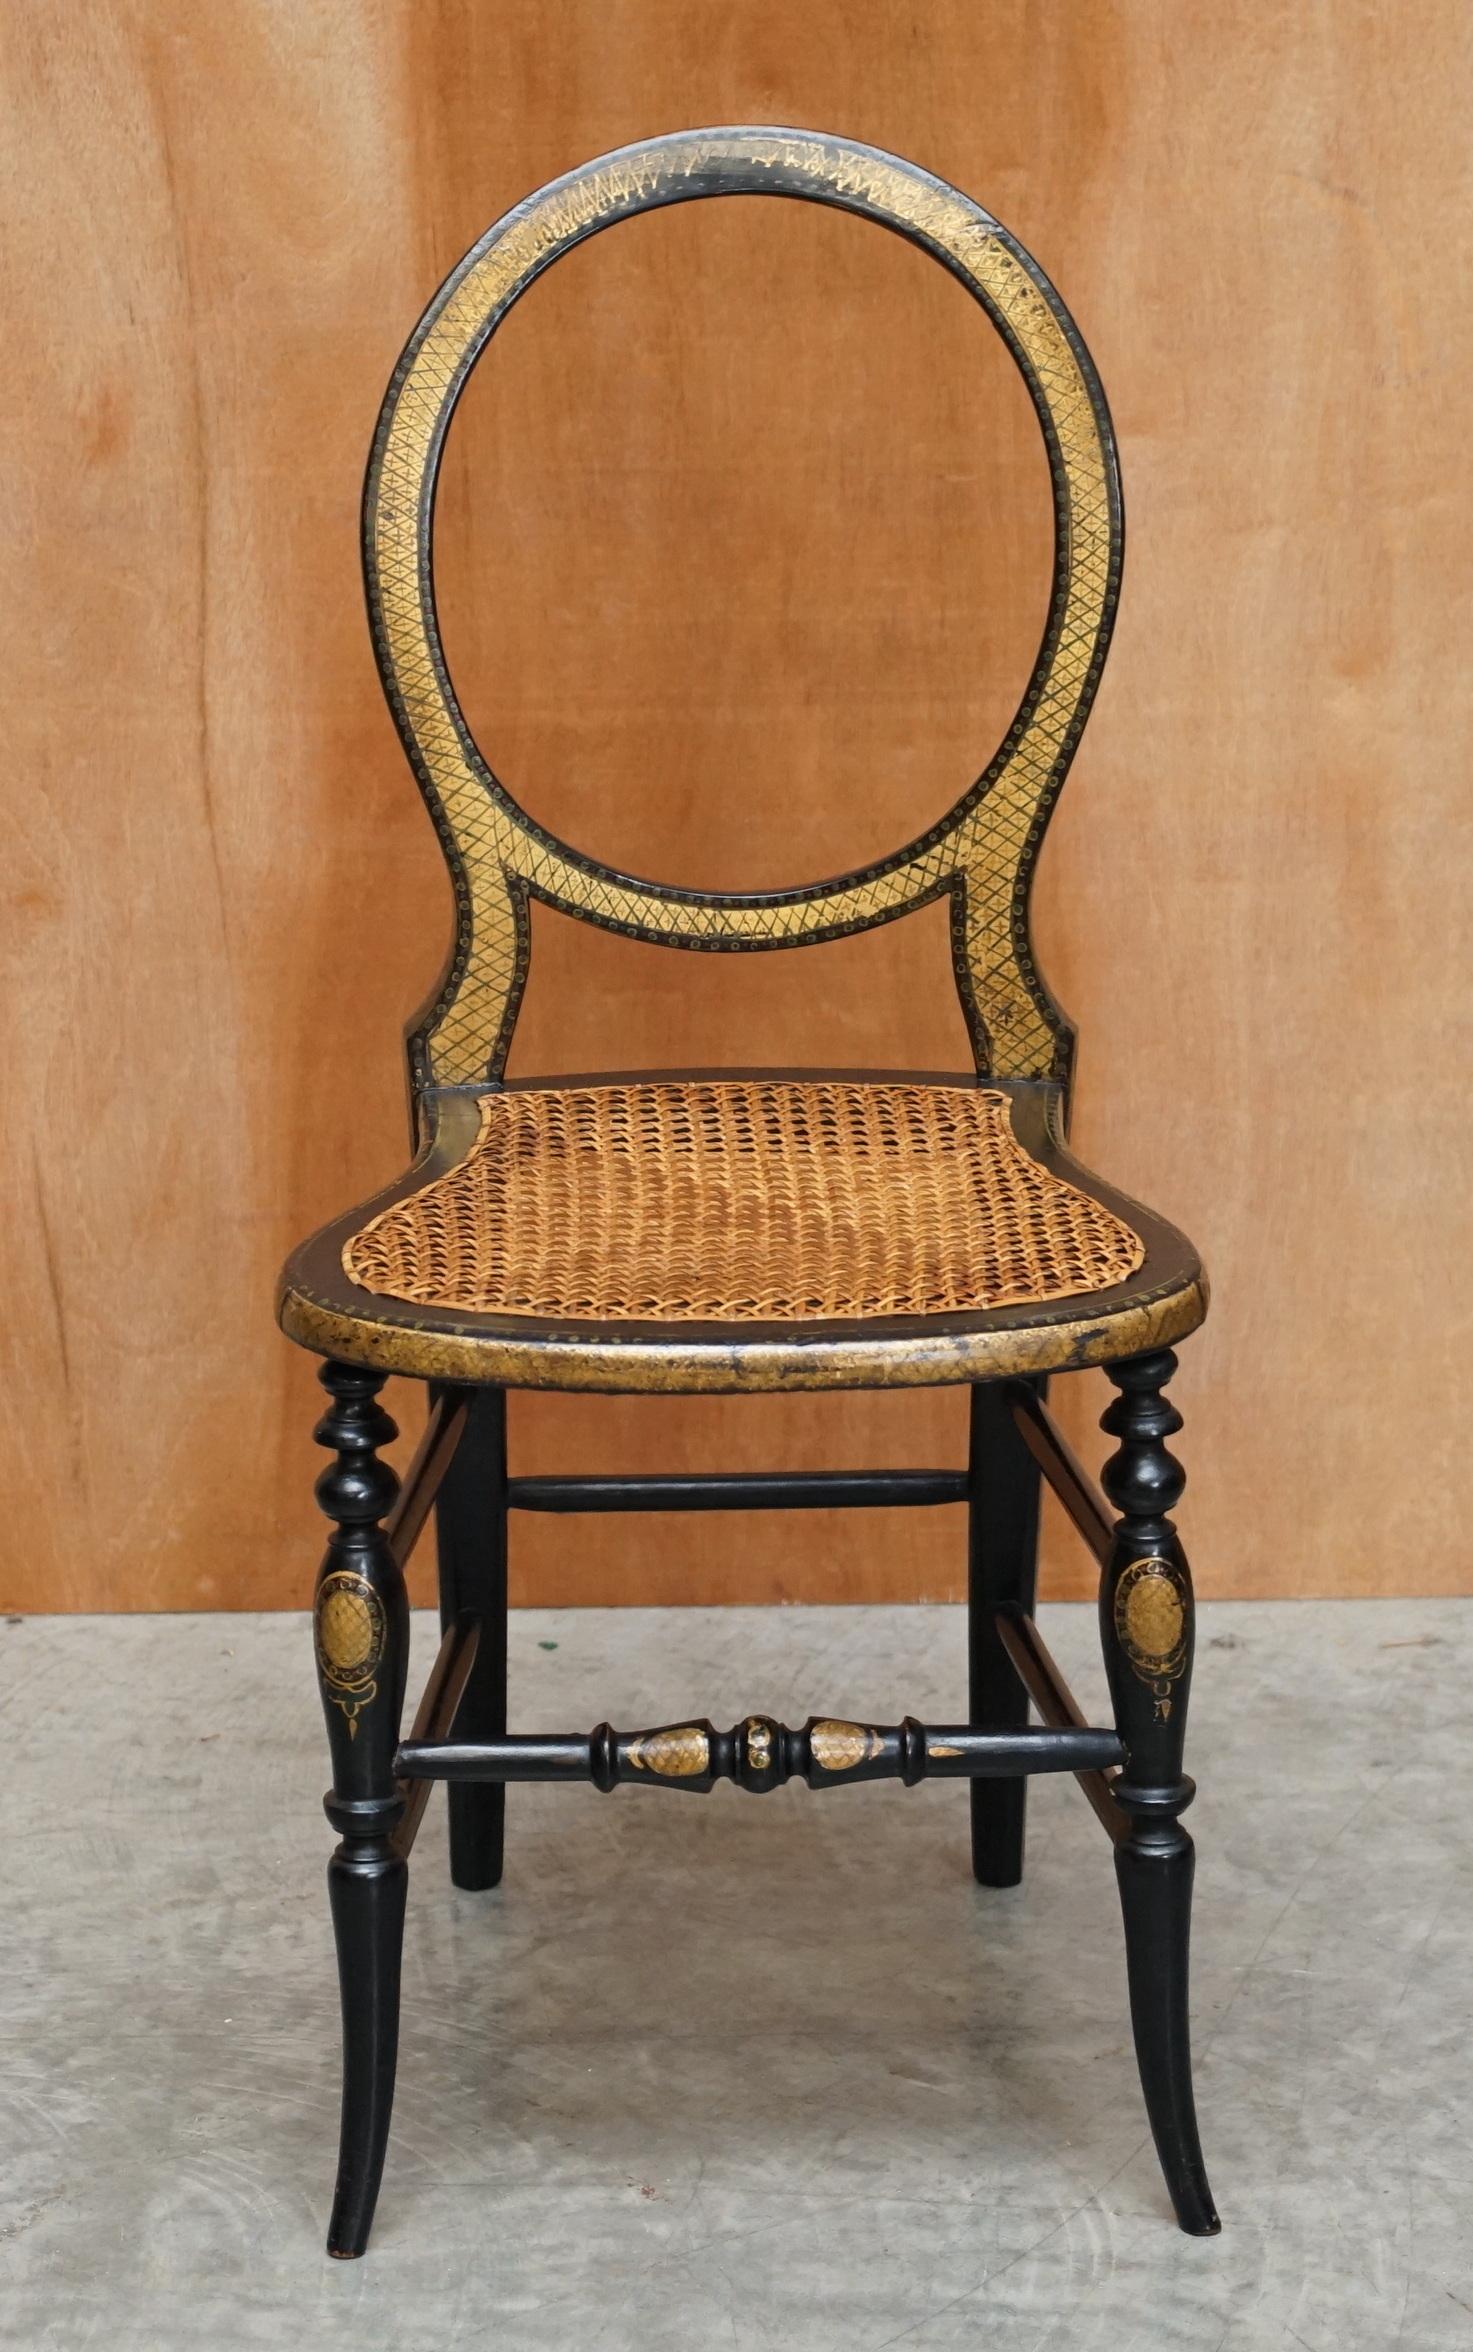 We are delighted to offer for sale this exquisite fully stamped original circa 1815 Regency Jennens & Bettridge LTD Birmingham ebonised gold leaf painted occasional bergere chair

A very good looking well made and decorative chairs. In truth, this